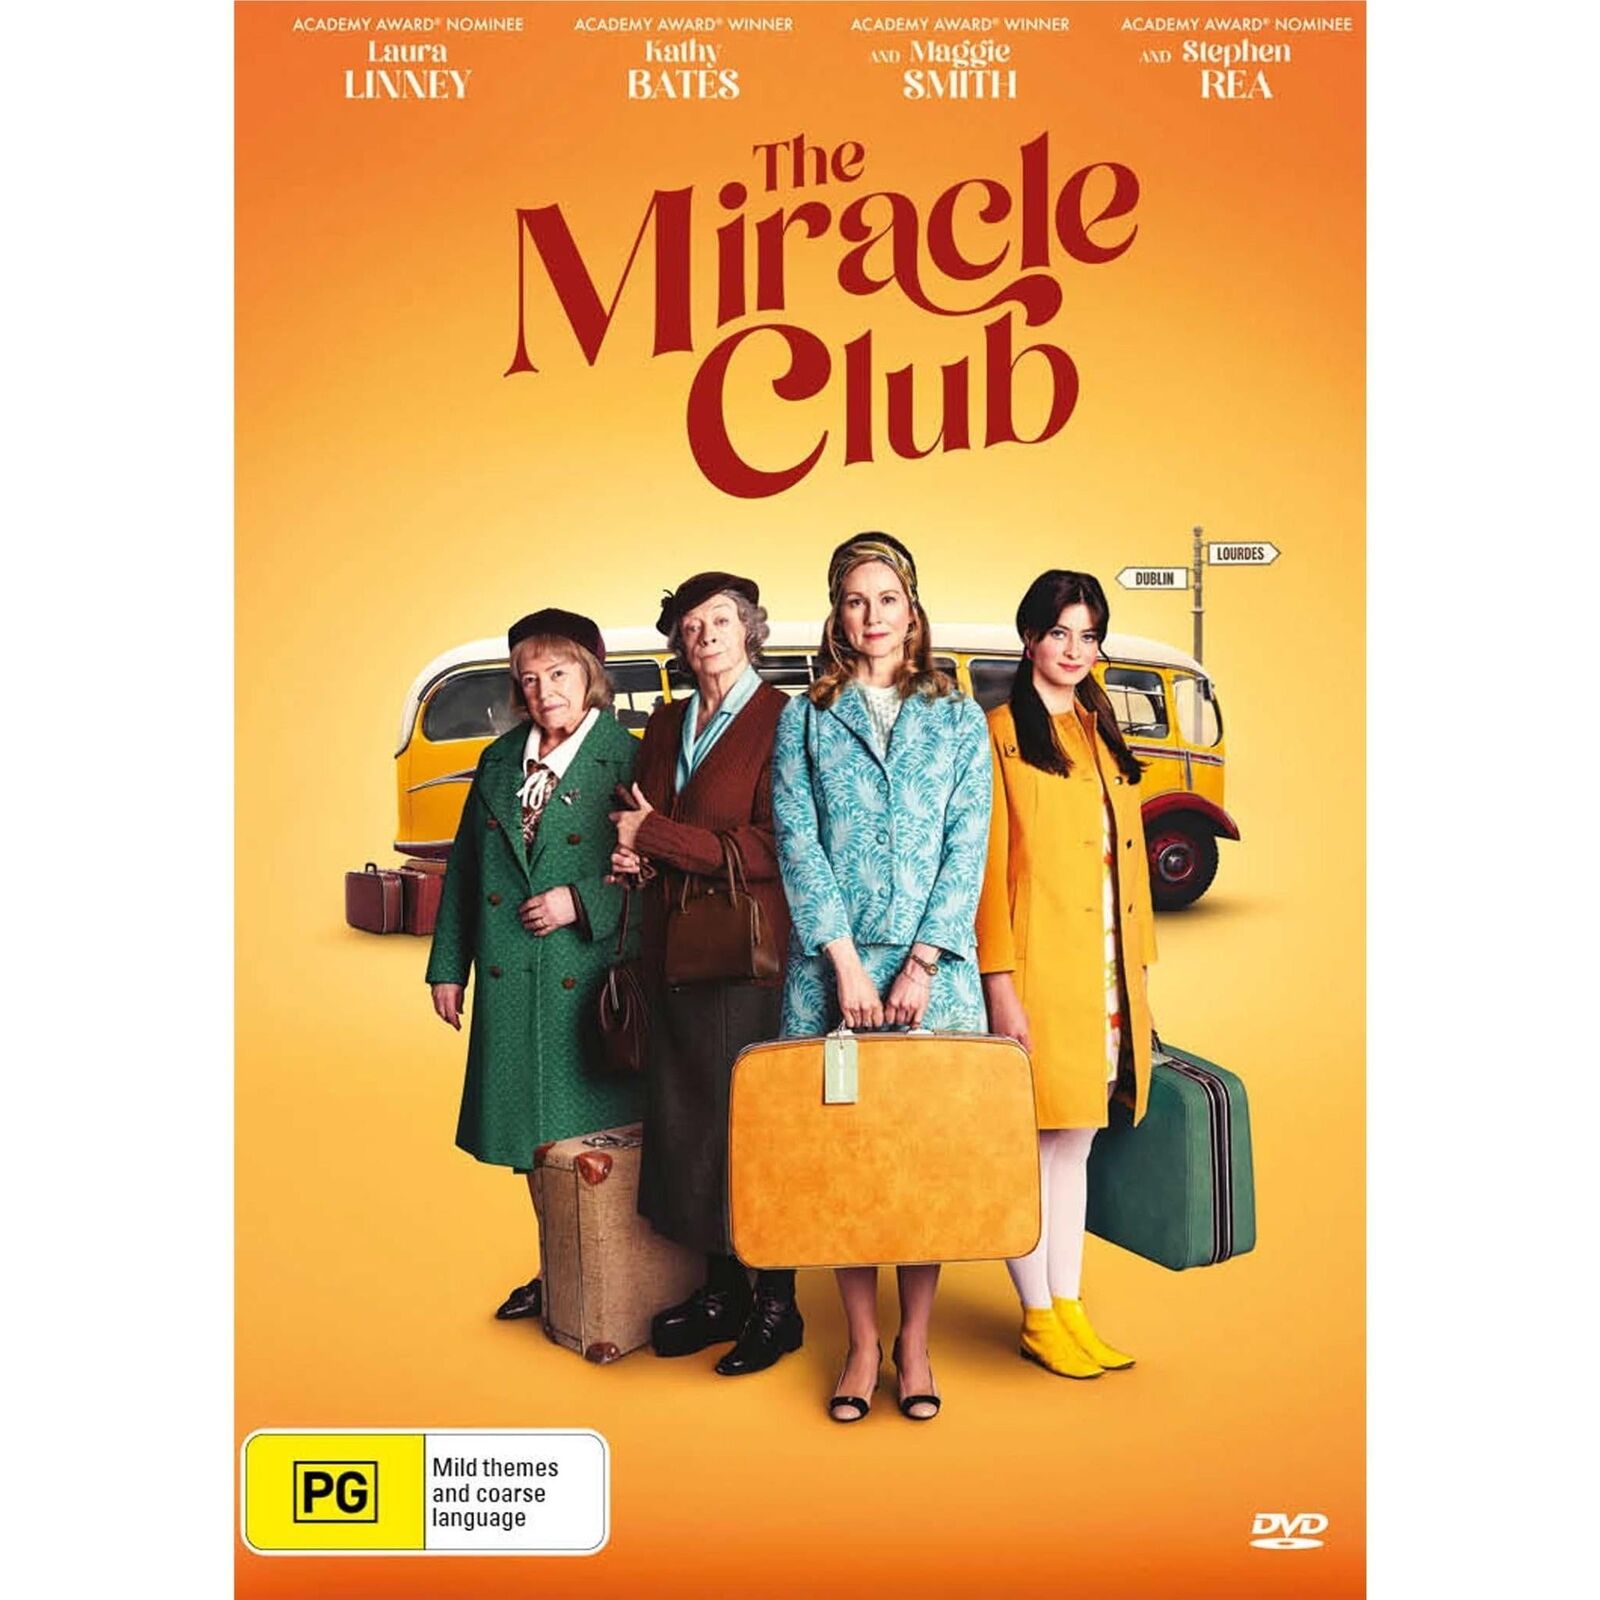 The Miracle Club   Laura Linney, Kathy Bates (DVD) Laura Linney Kathy Bates